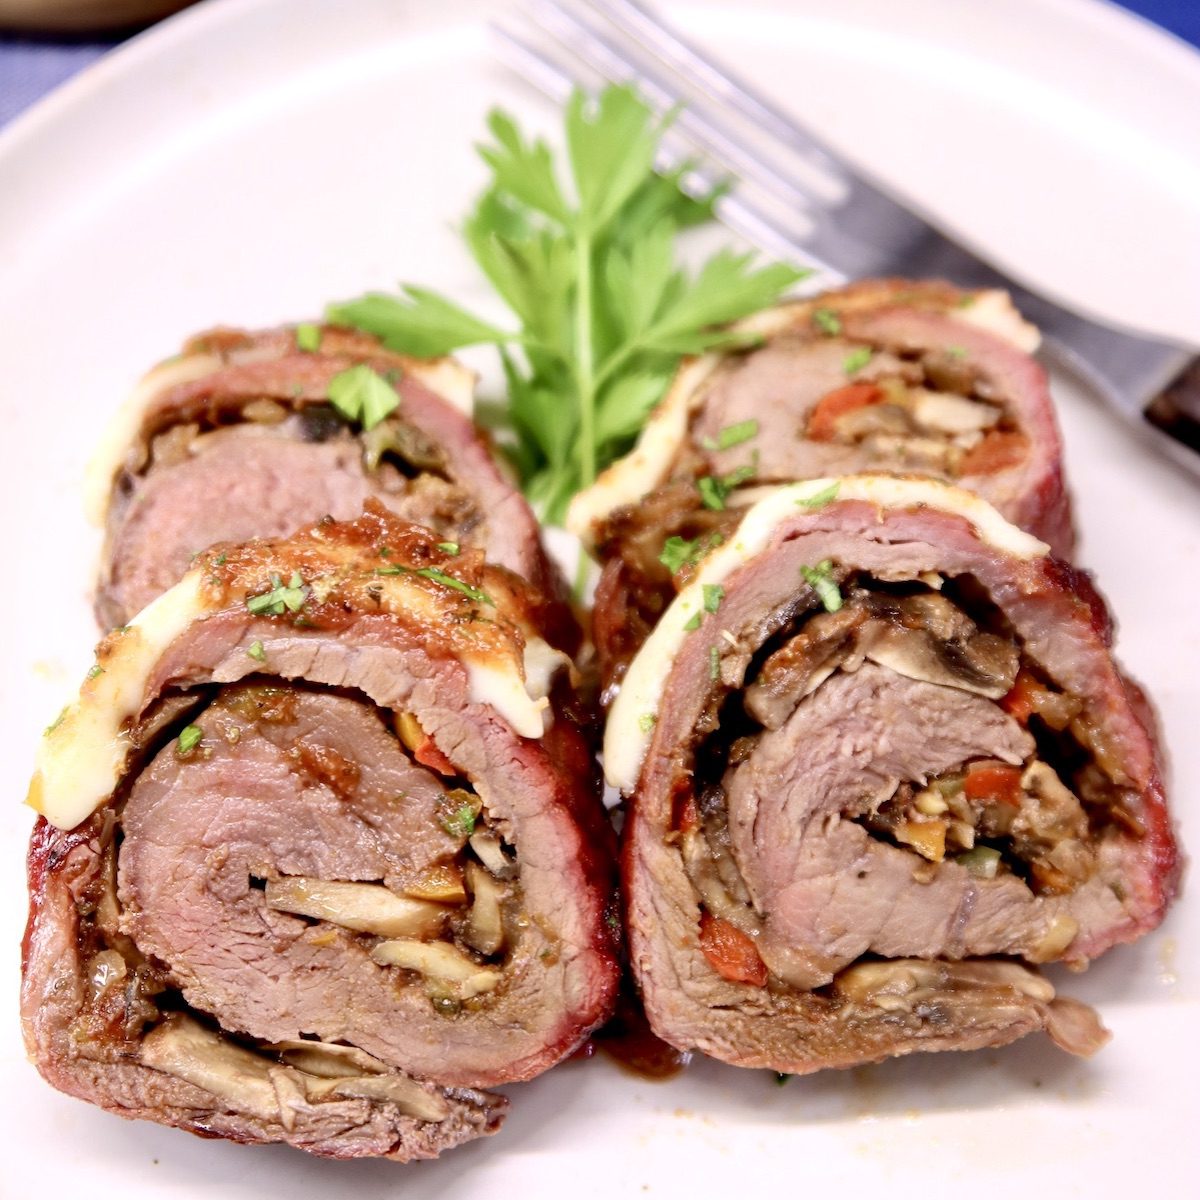 grilled stuffed steak slices on a plate